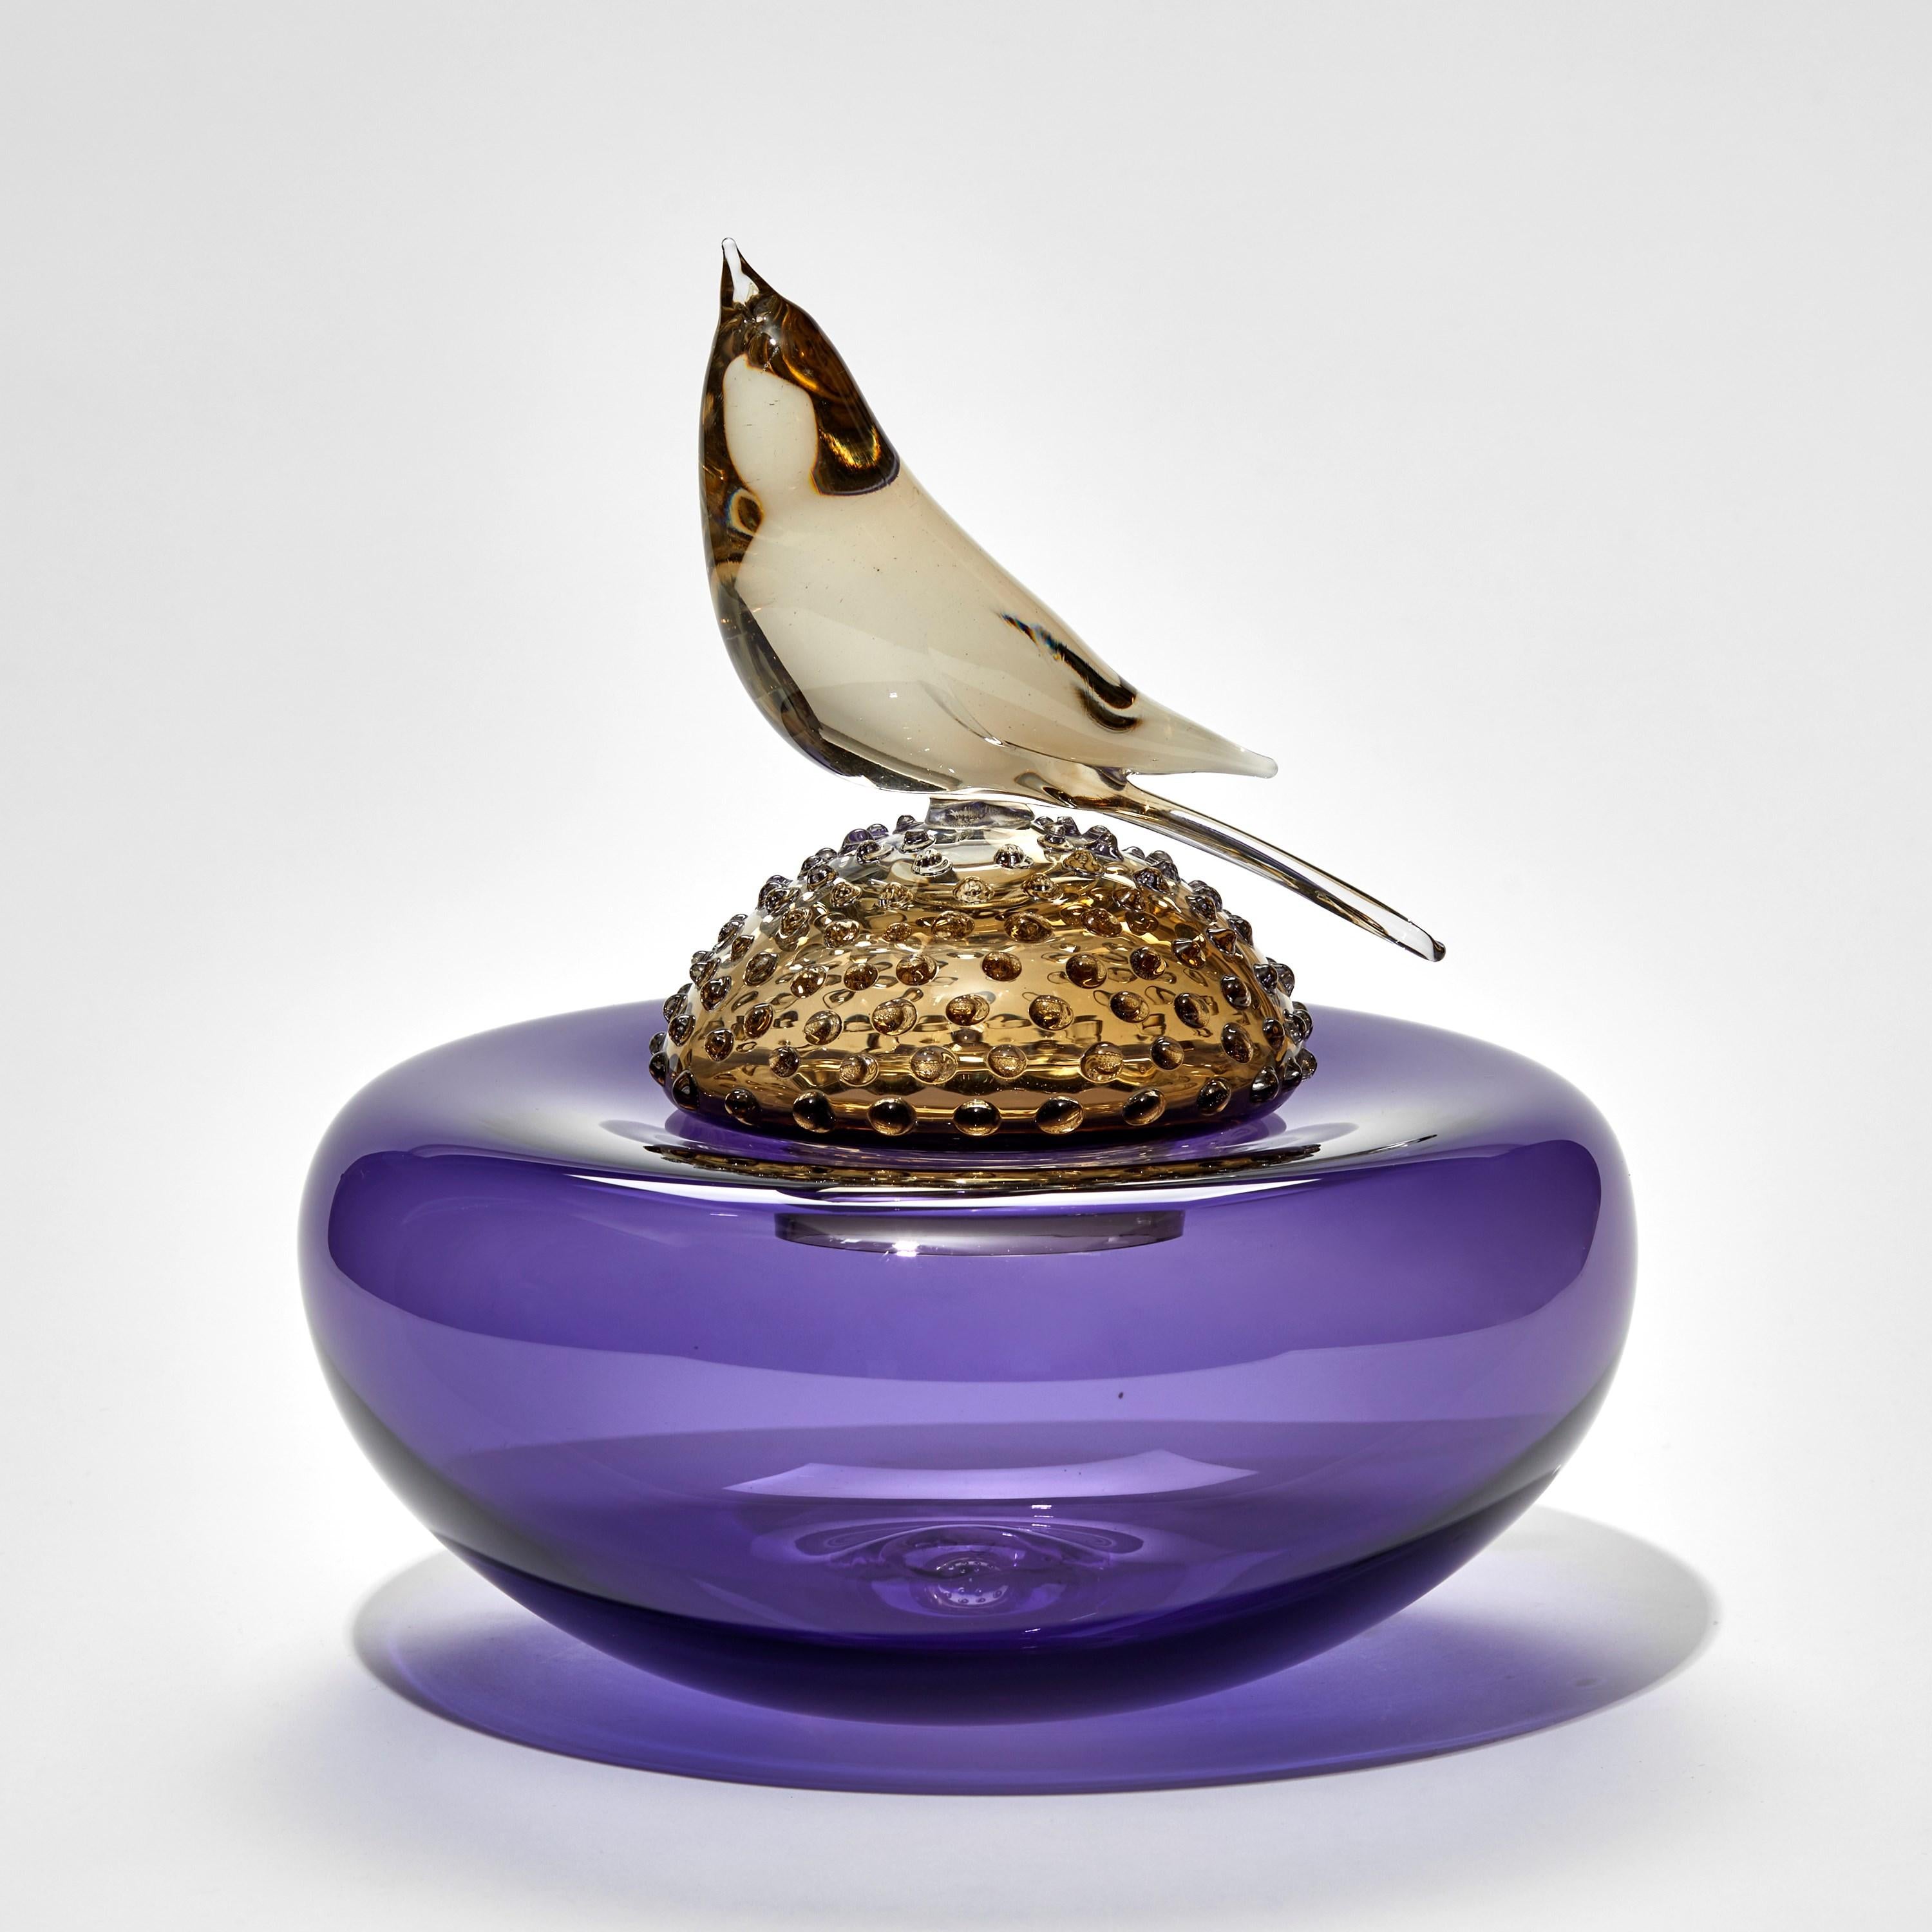 All About Birds IV, is a hand-blown art glass vase/bowl in purple adorned with a hot sculpted bird by the Scottish artist, Julie Johnson. The bird figurine can also be lifted off with the main body leaving a functioning vessel.

About the